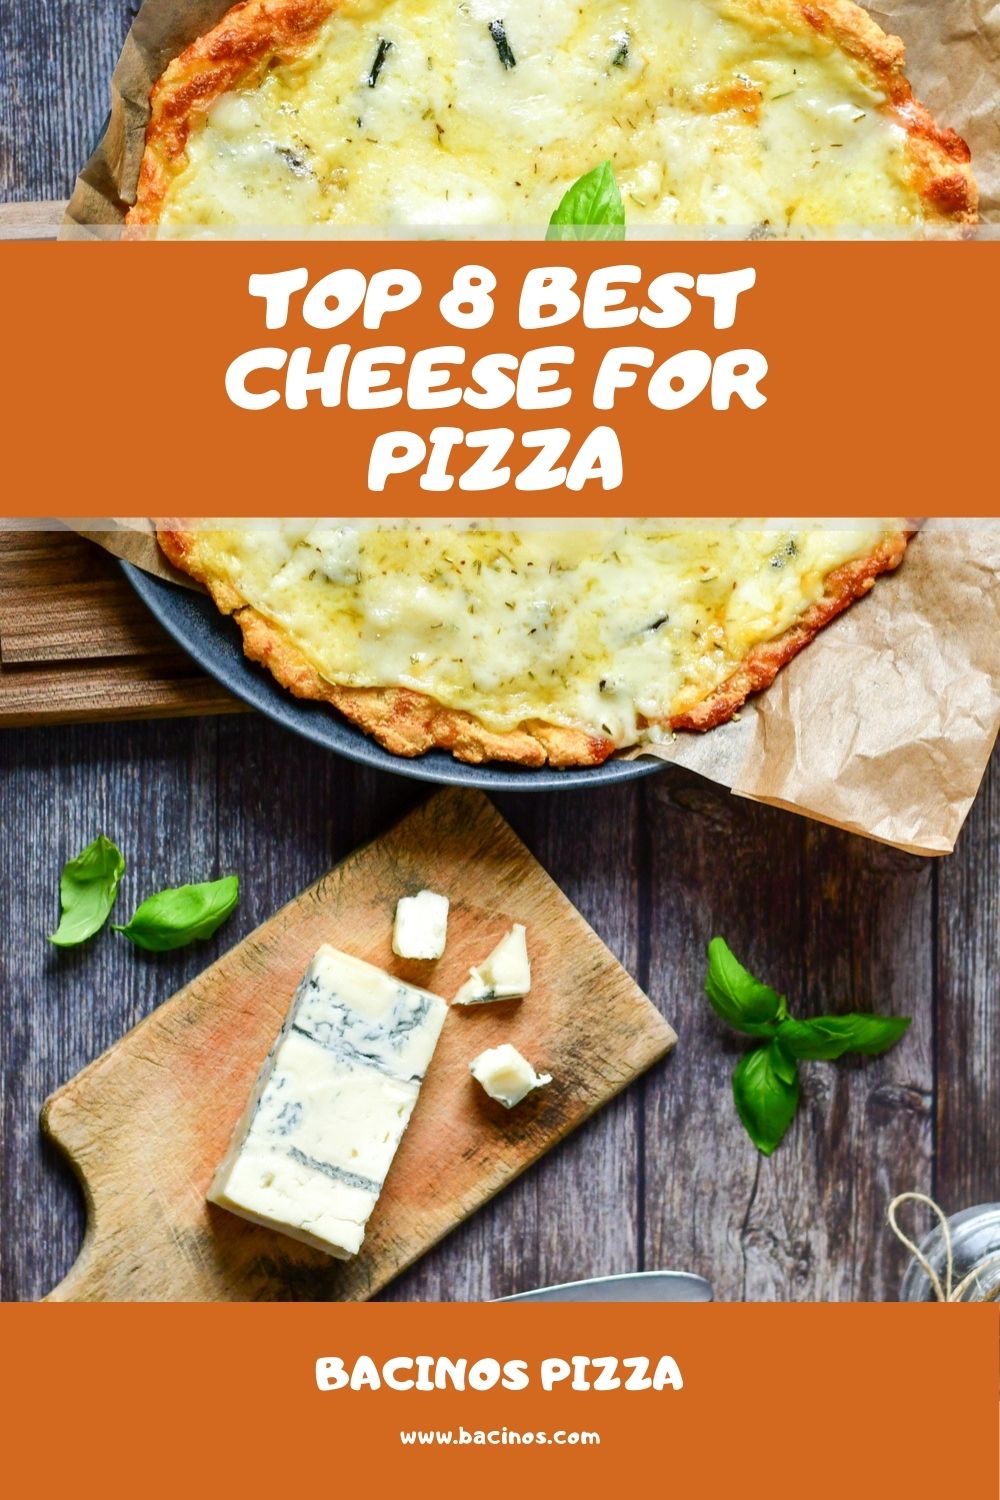 Top 8 Best Cheese for Pizza 1